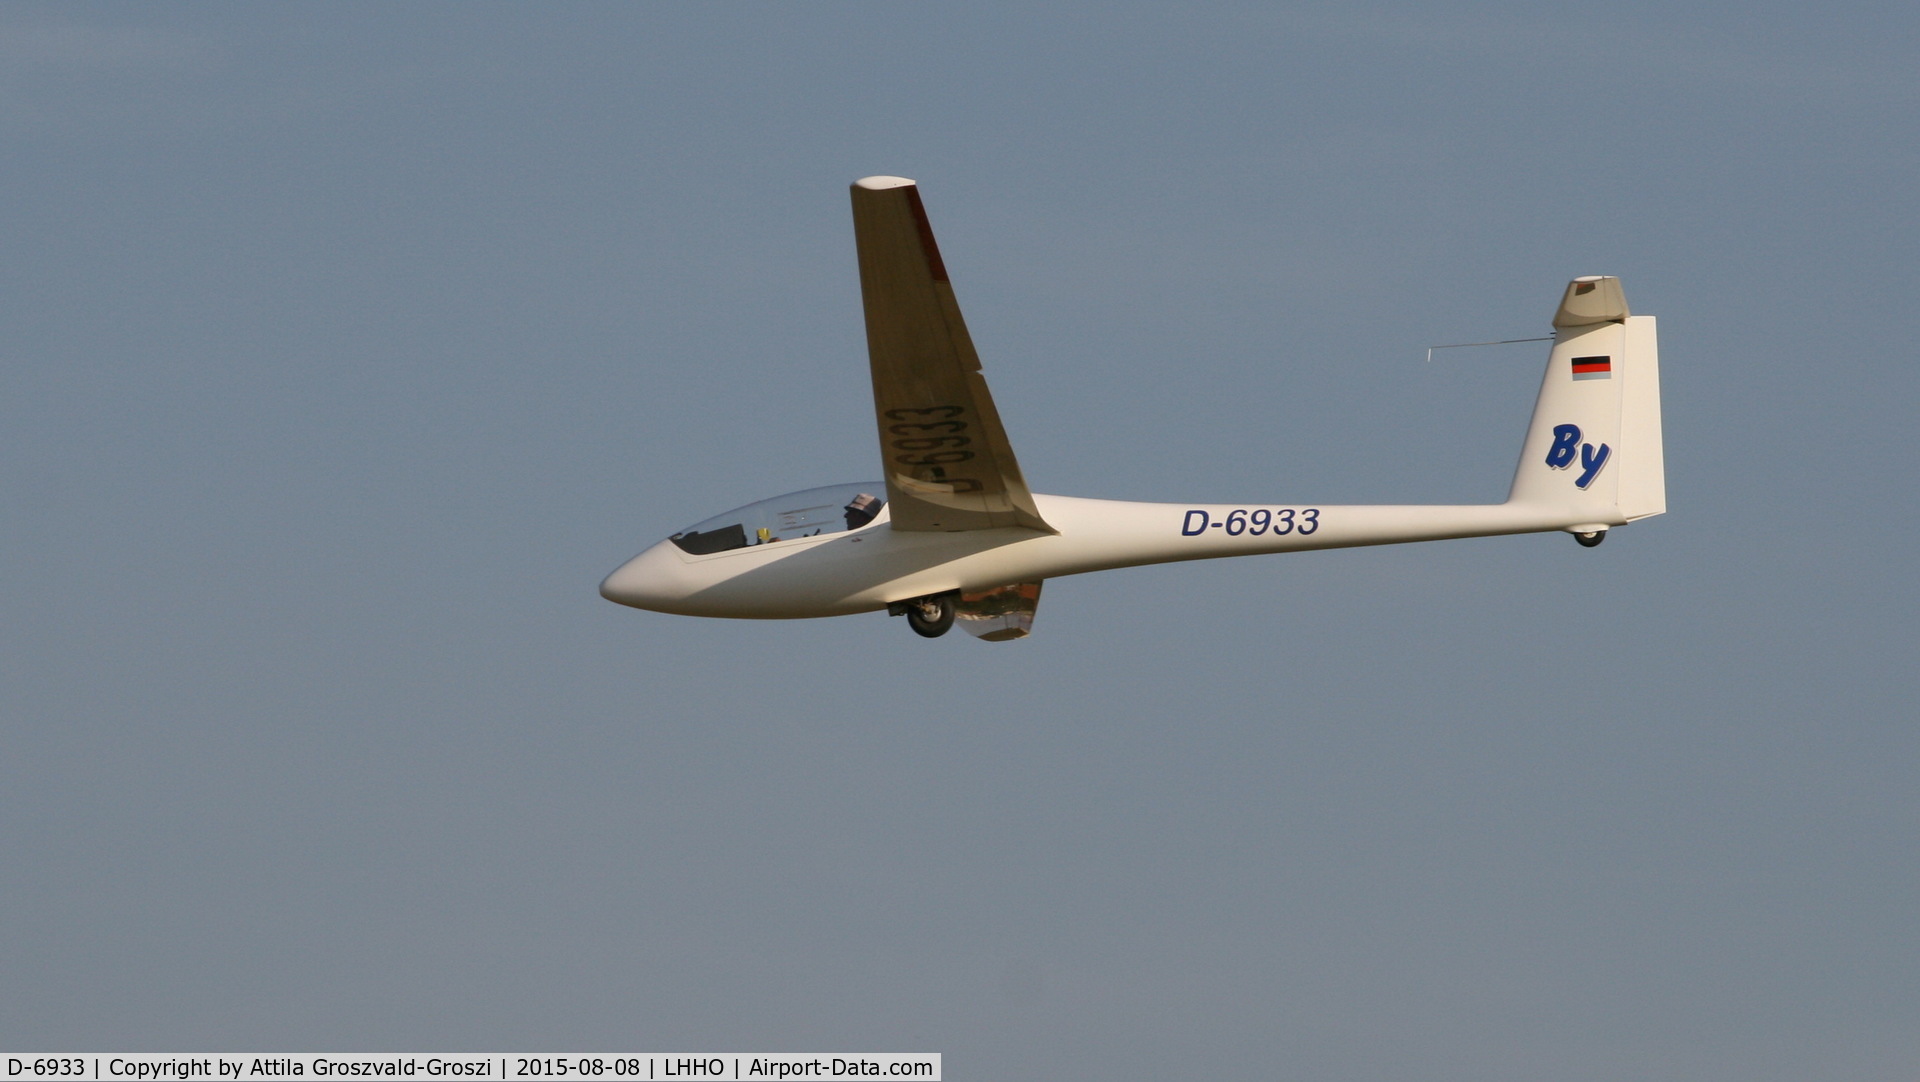 D-6933, Rolladen-Schneider LS-3a C/N Not found D-6933, Hajdúszoboszló Airport, Hungary - 60. Hungary Gliding National Championship and third Civis Thermal Cup, 2015